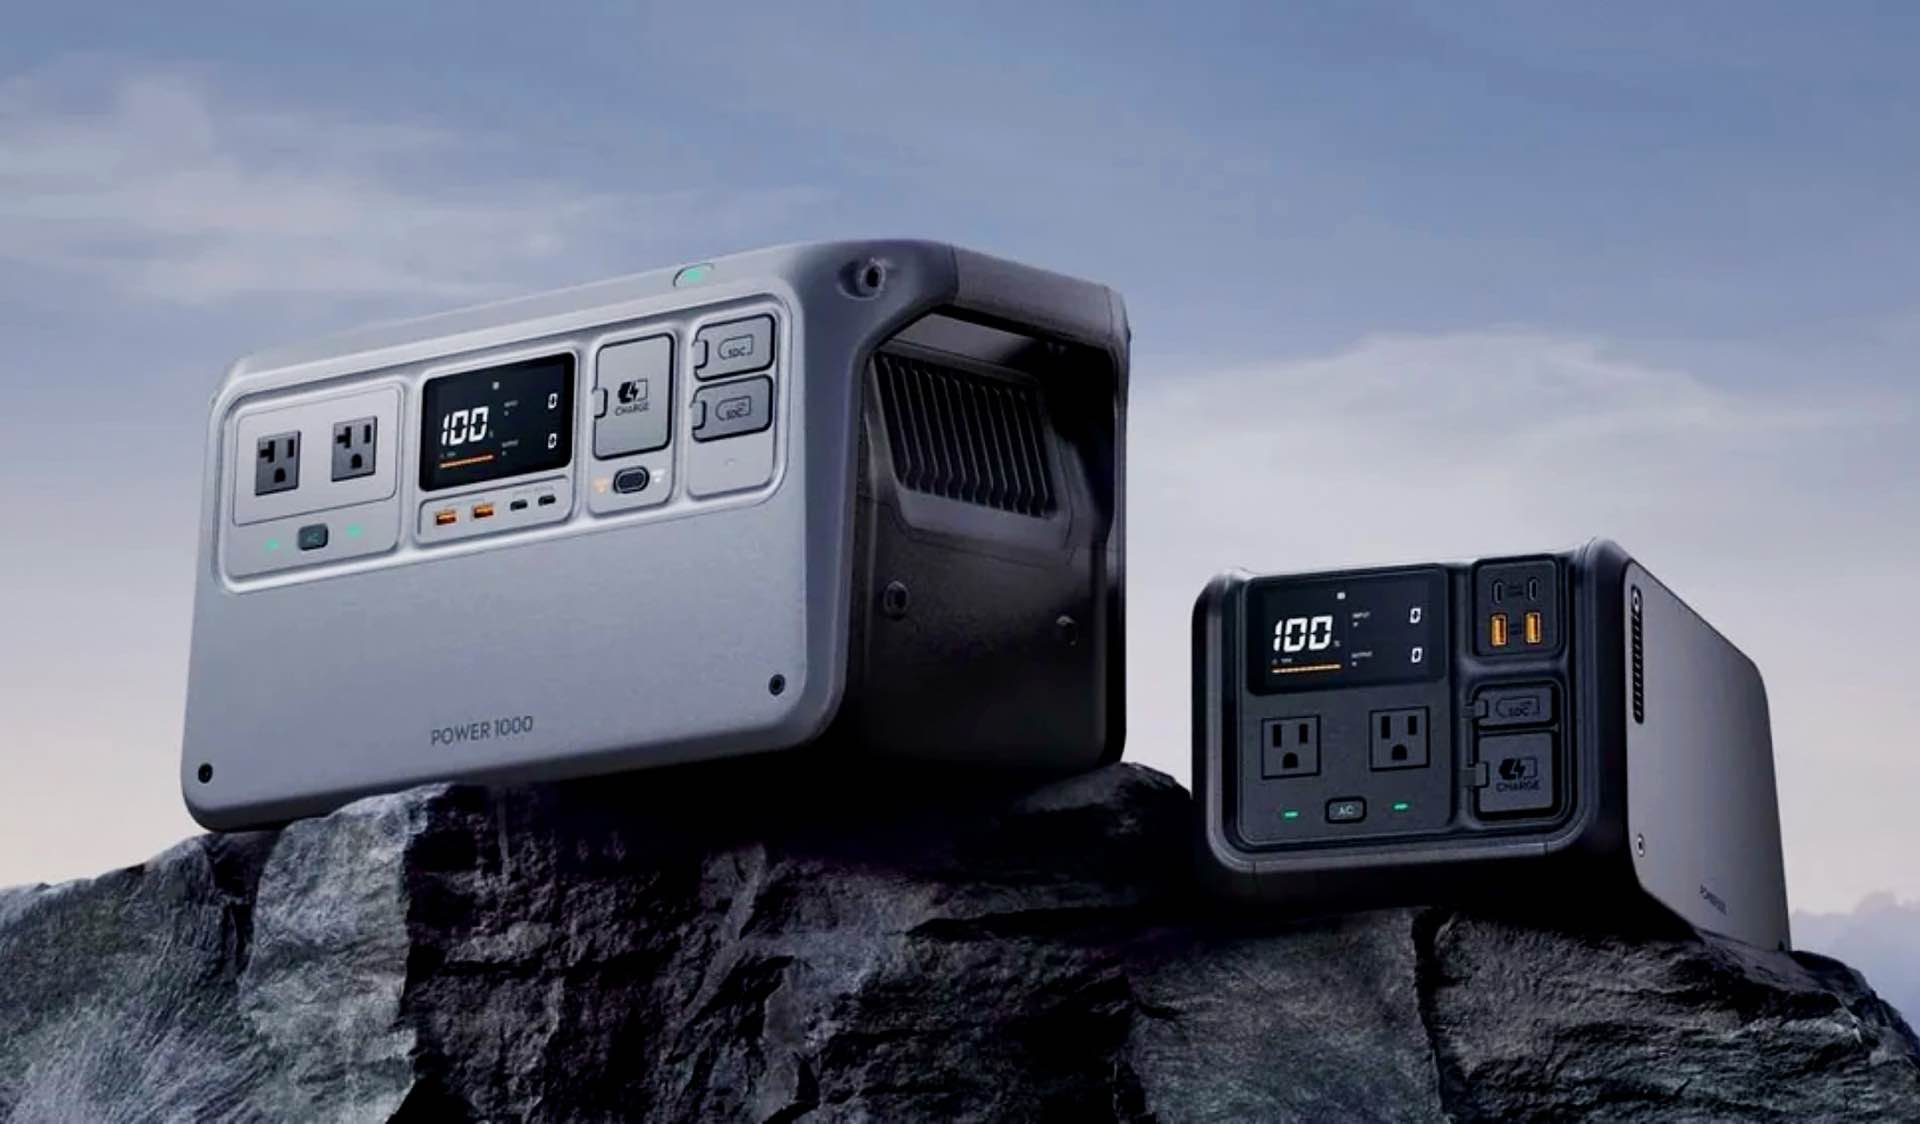 dji-power-1000-and-power-500-portable-power-stations